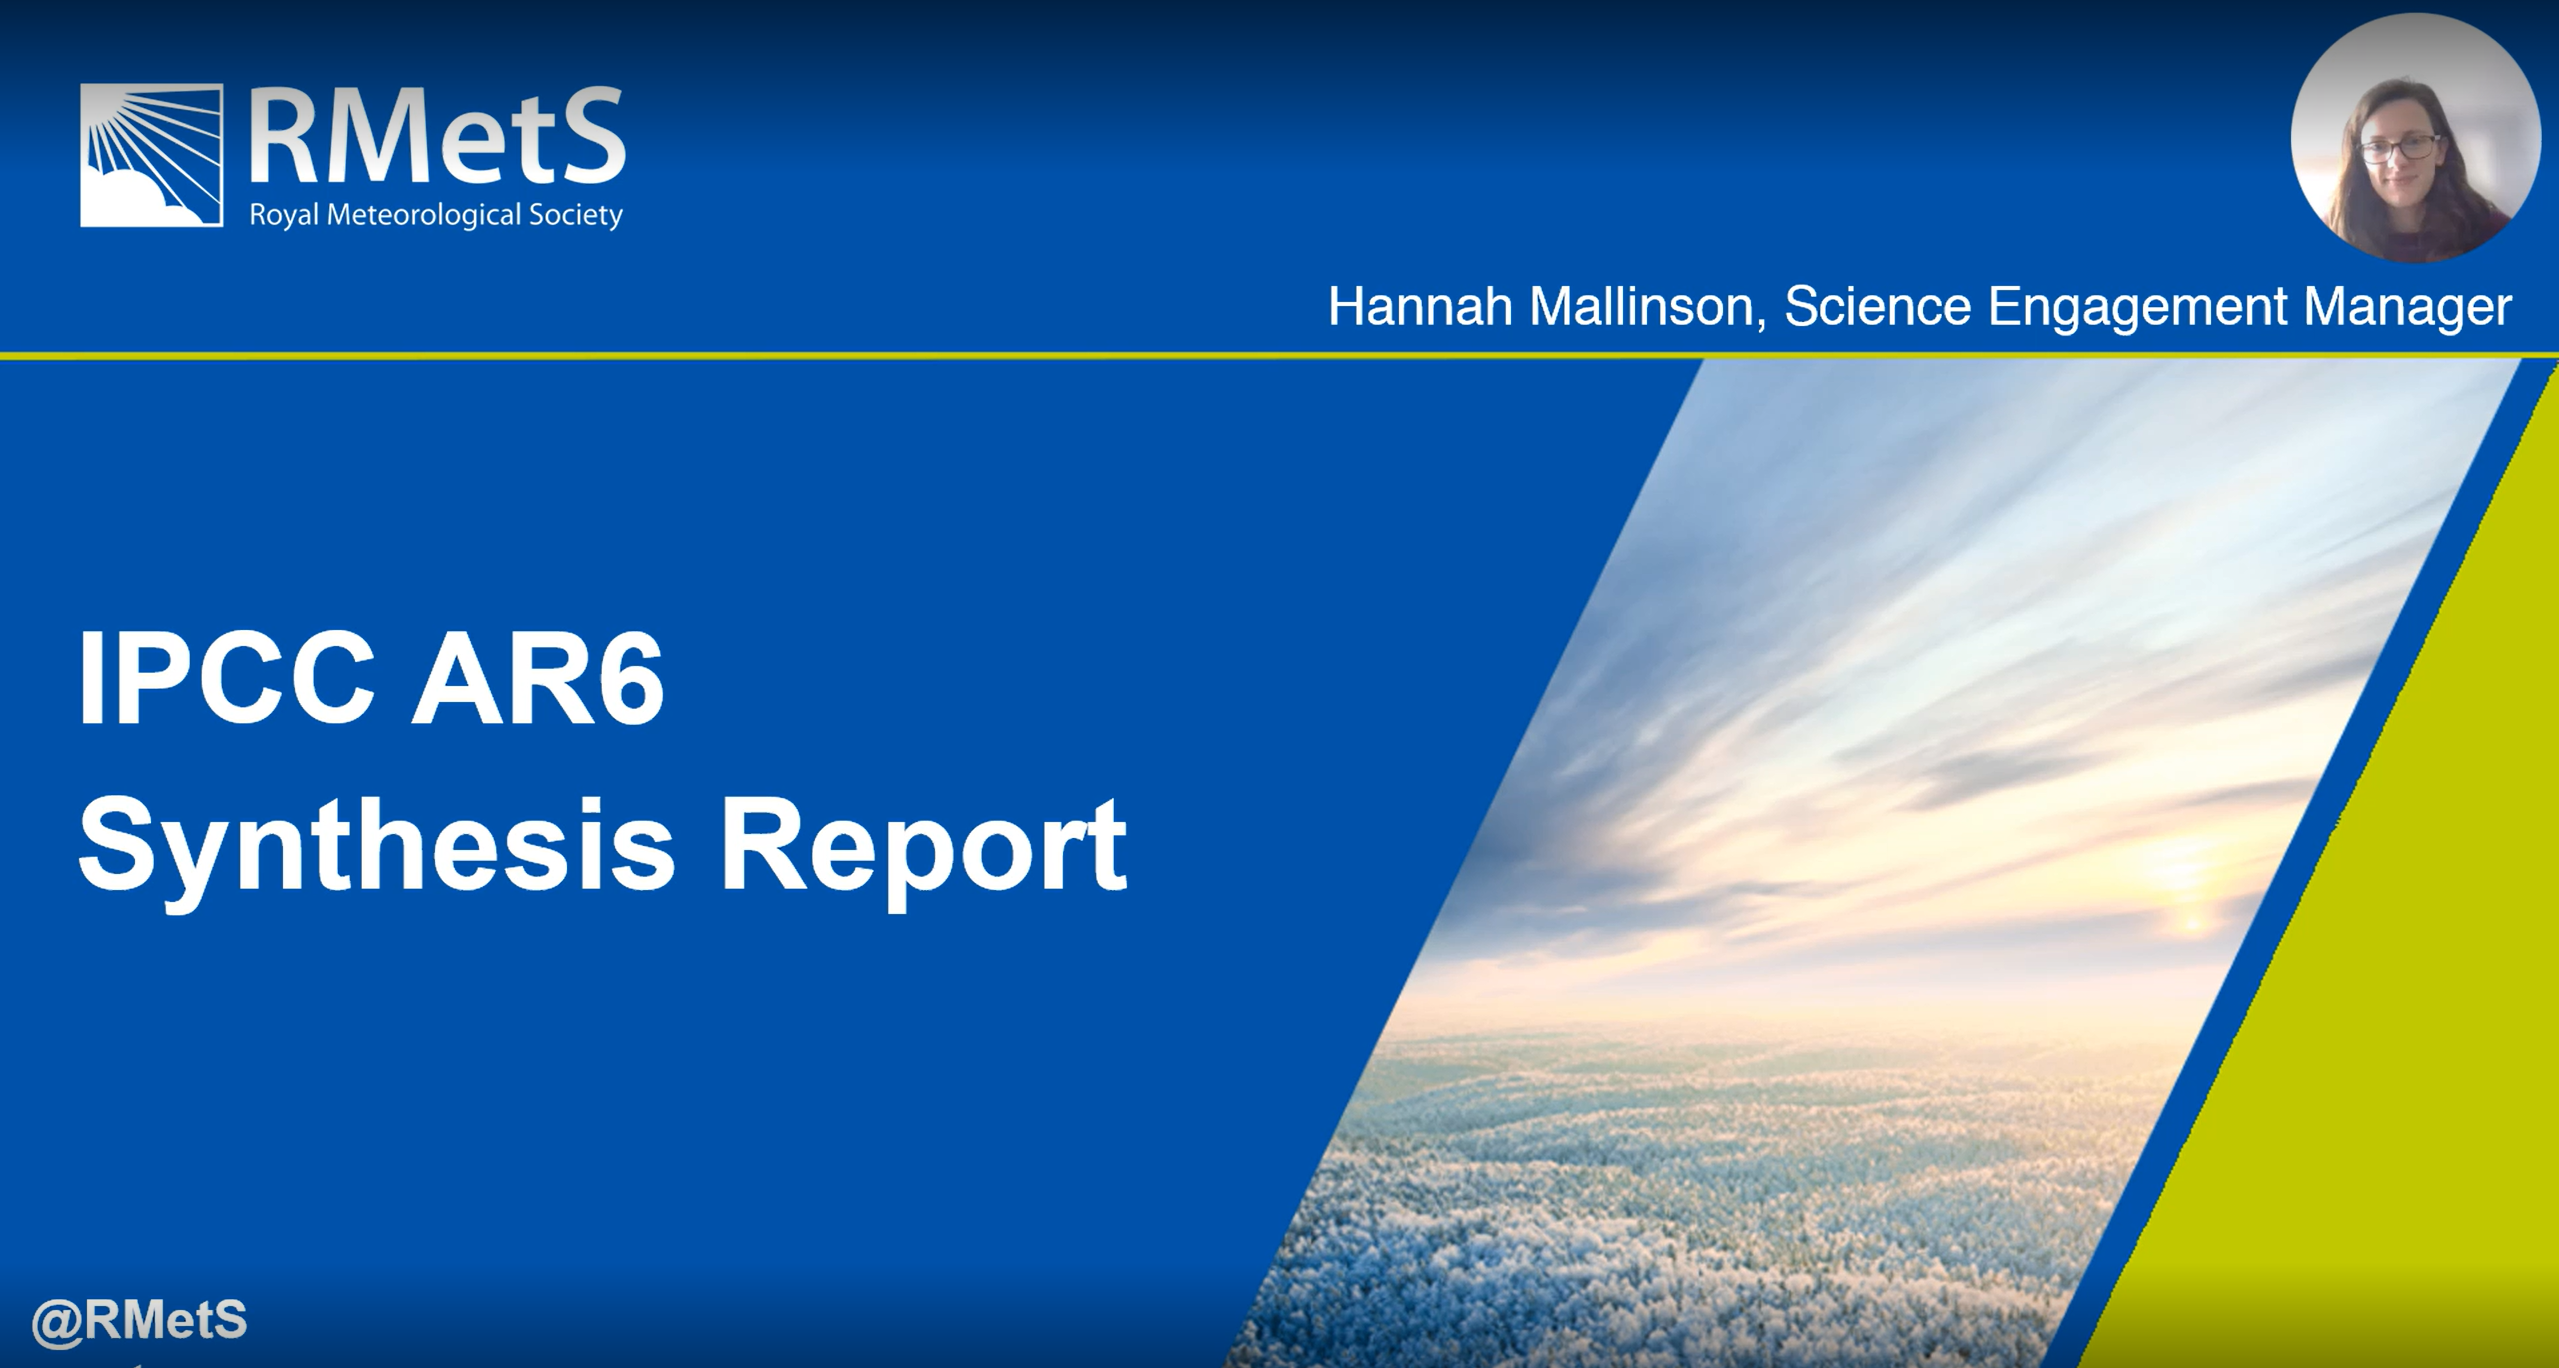 ipcc synthesis report 2021